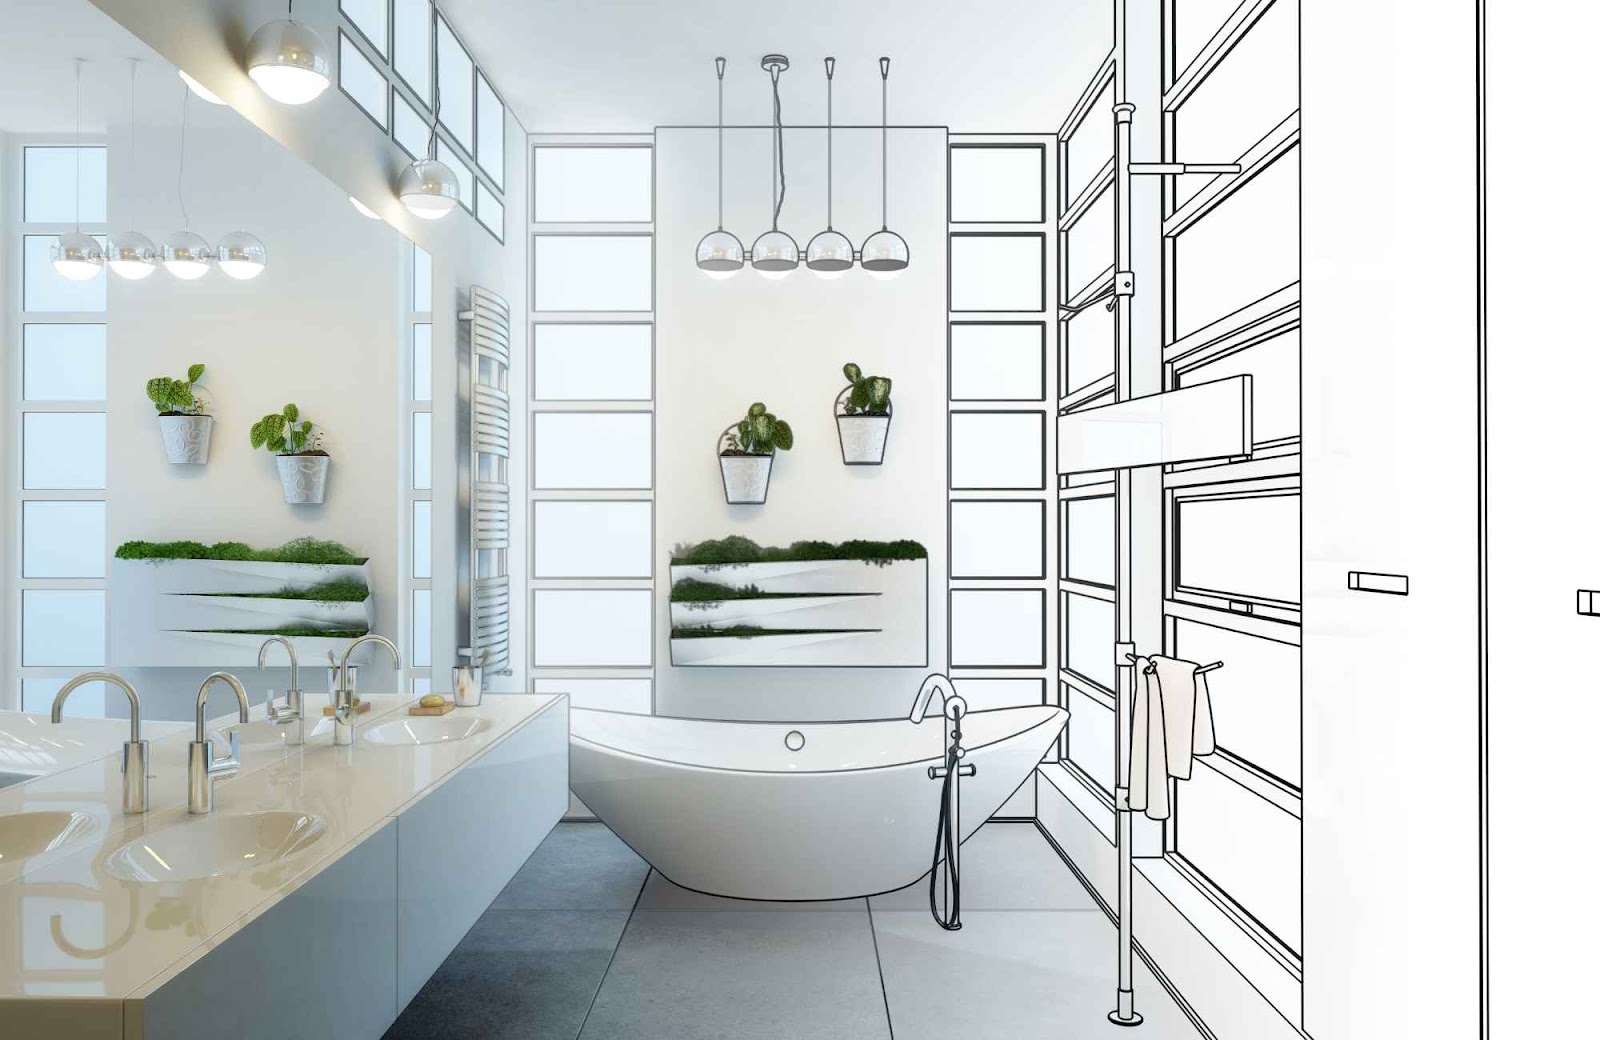 raashi-design-danville-ca-building-or-buying-image-of-a-modern-bathroom-design-with-large-tub-and-towel-warmers